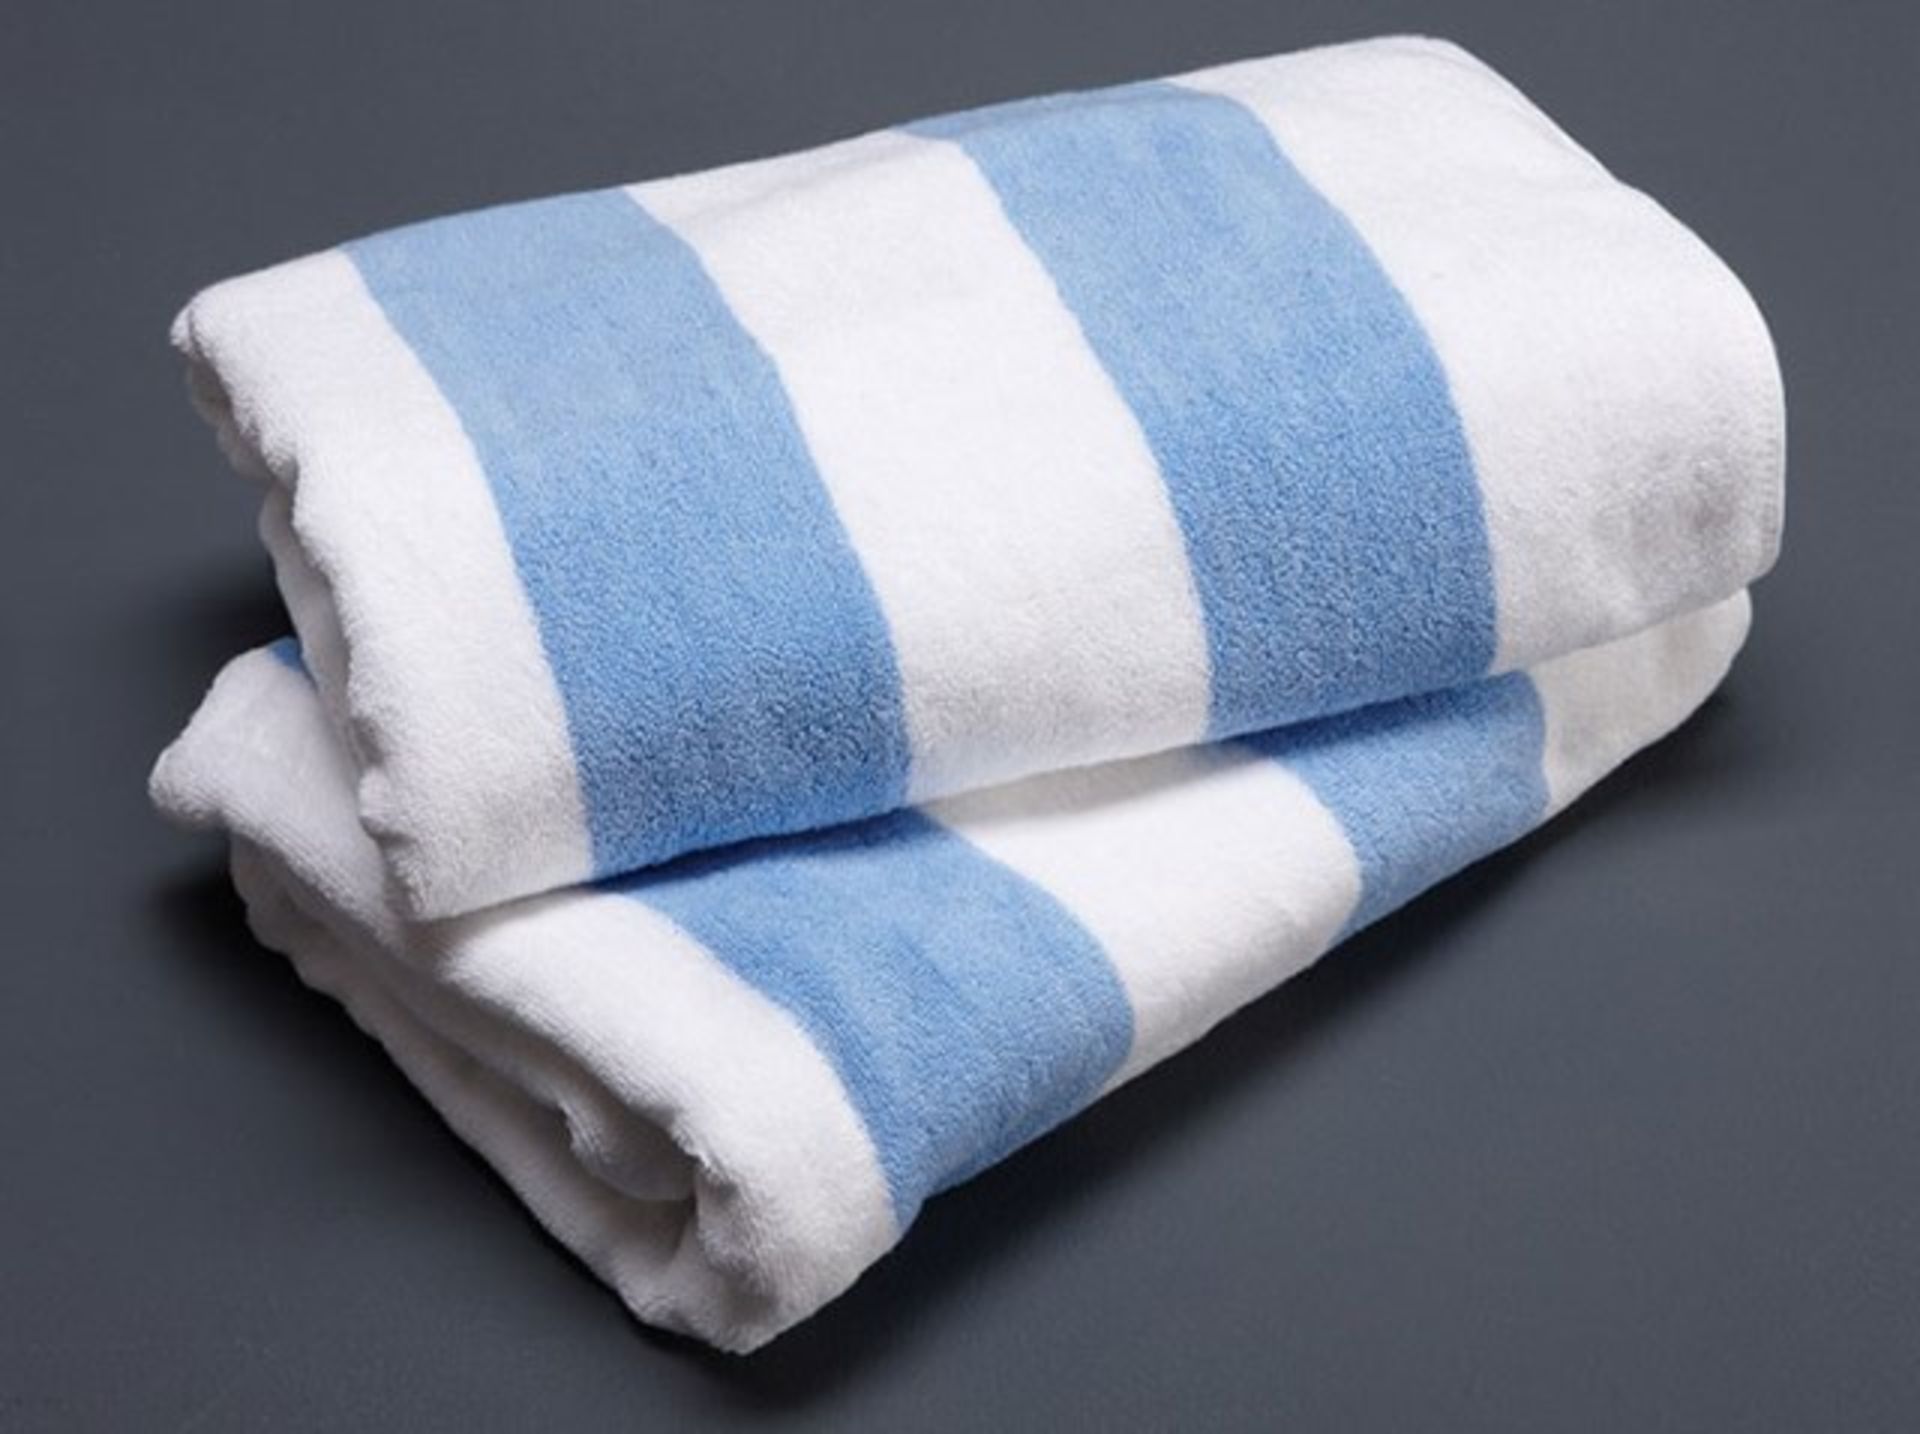 V *TRADE QTY* Brand New Blue & White Striped Pool Towel 100% Cotton X 6 Bid price to be multiplied